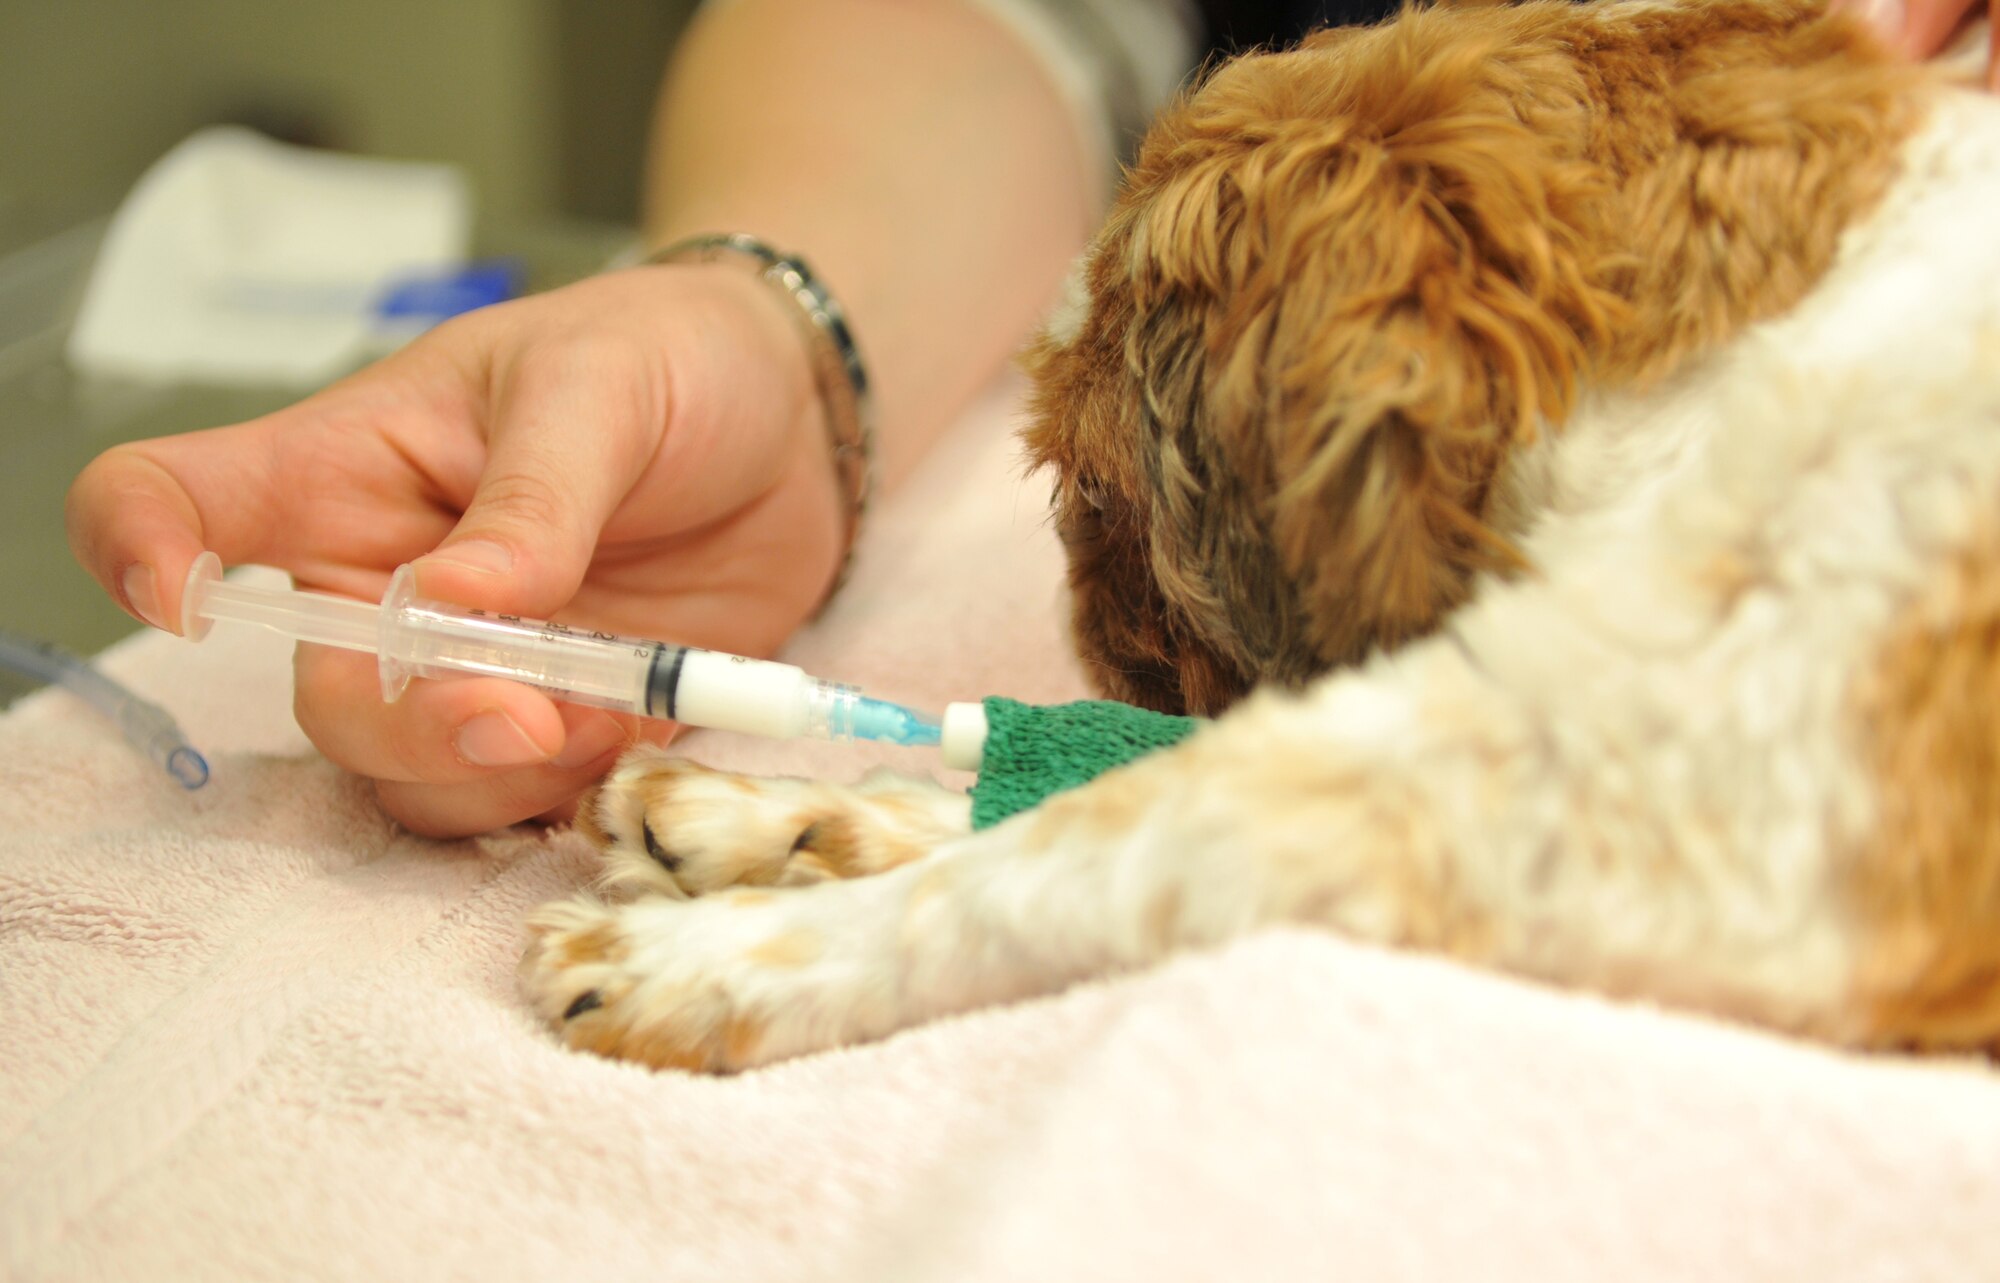 Chelsie Thompson, 106th Medical Detachment animal health technician, delivers anesthesia through the IV of Thor, a shih tzu, to prepare him for a minor operation at the Veterinary Treatment Facility on Osan Air Base, Republic of Korea, June 3, 2014. Thor was neutered and given all necessary vaccinations like all cats and dogs housed at Osan’s Homeward Bound animal shelter. (U.S. Air Force photo/Airman 1st Class Ashley J. Thum)